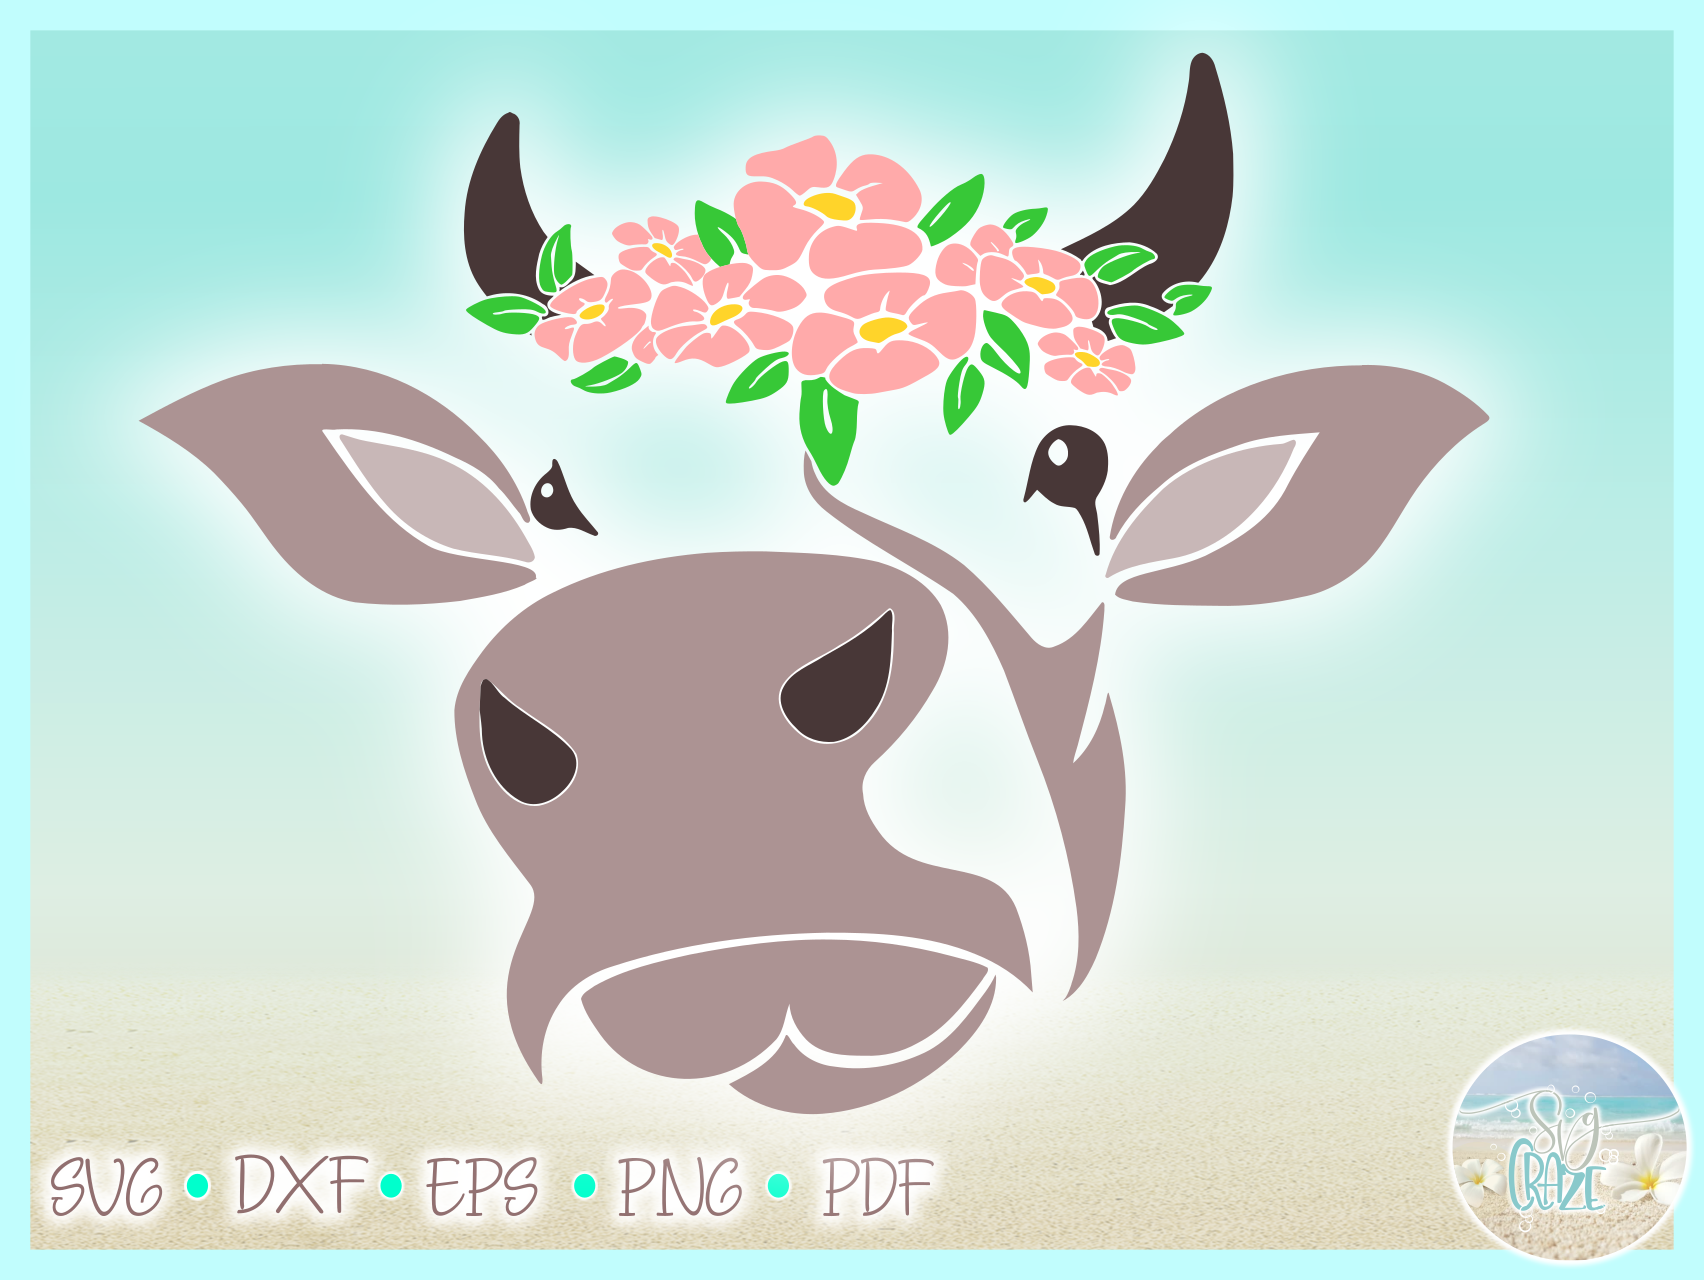 Download Cow Face With Flowers Svg Dxf Eps Png Pdf Files For Cricut